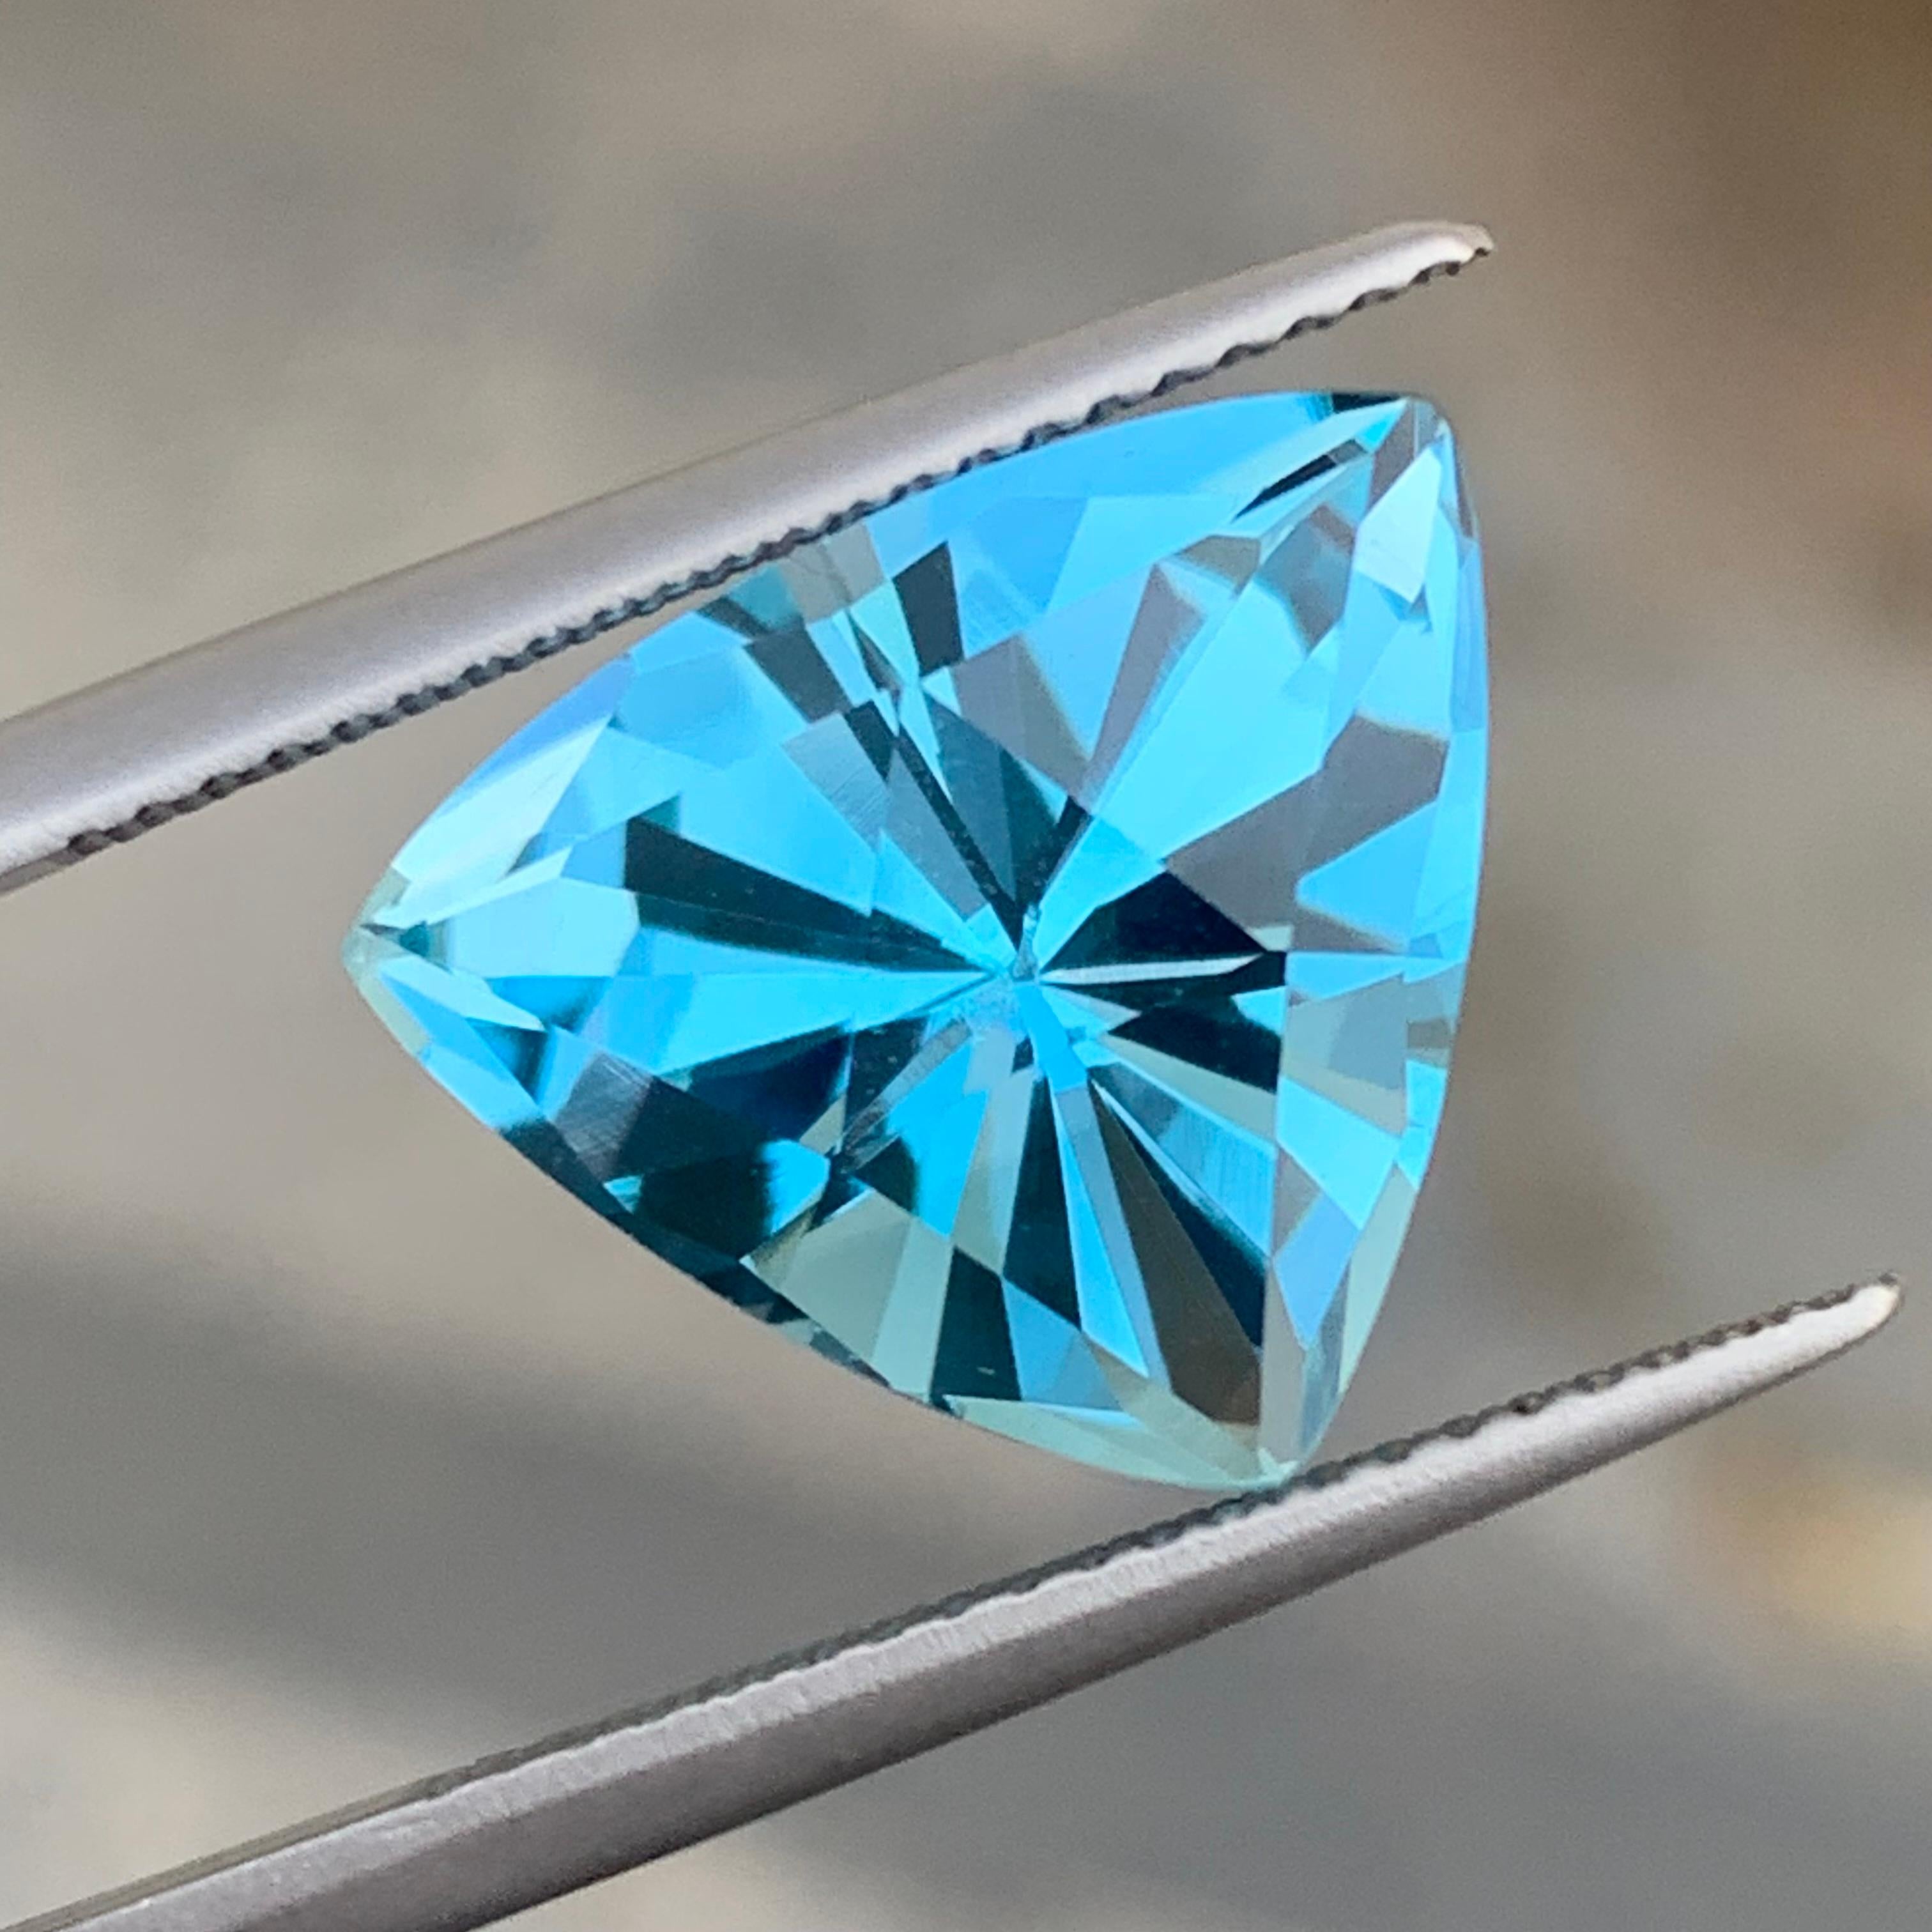 Genuine 9.0 Carat Trillion Cut Loose Blue Topaz from Brazil Available for Sell For Sale 4